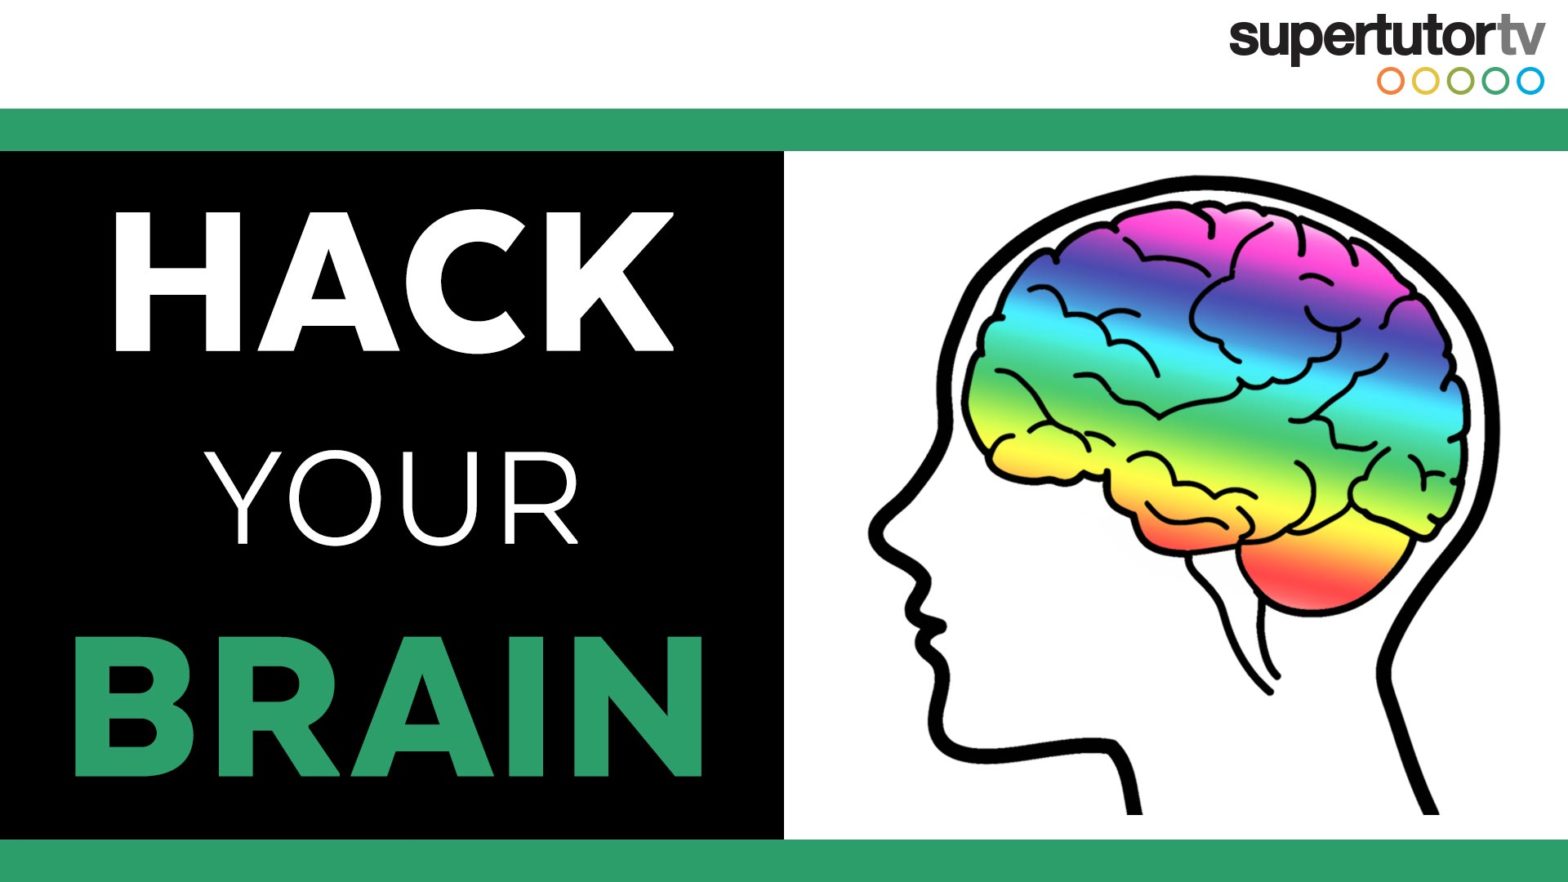 Hack Your Brain: 3 Study Tips Based on Psychology!